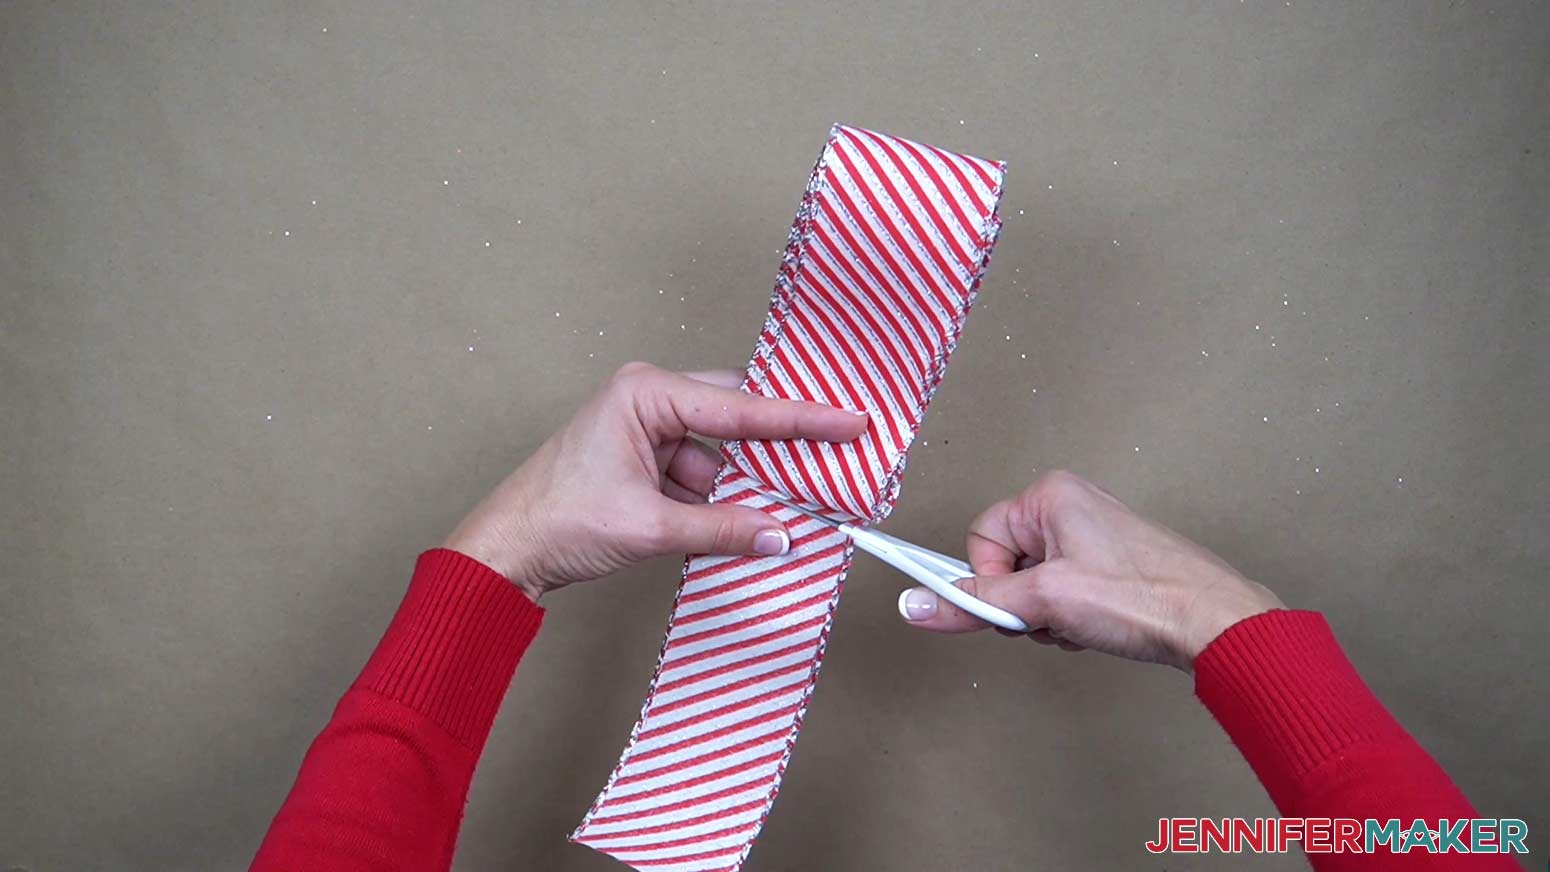 Trim off the top layer to use as the end ribbon pieces later.